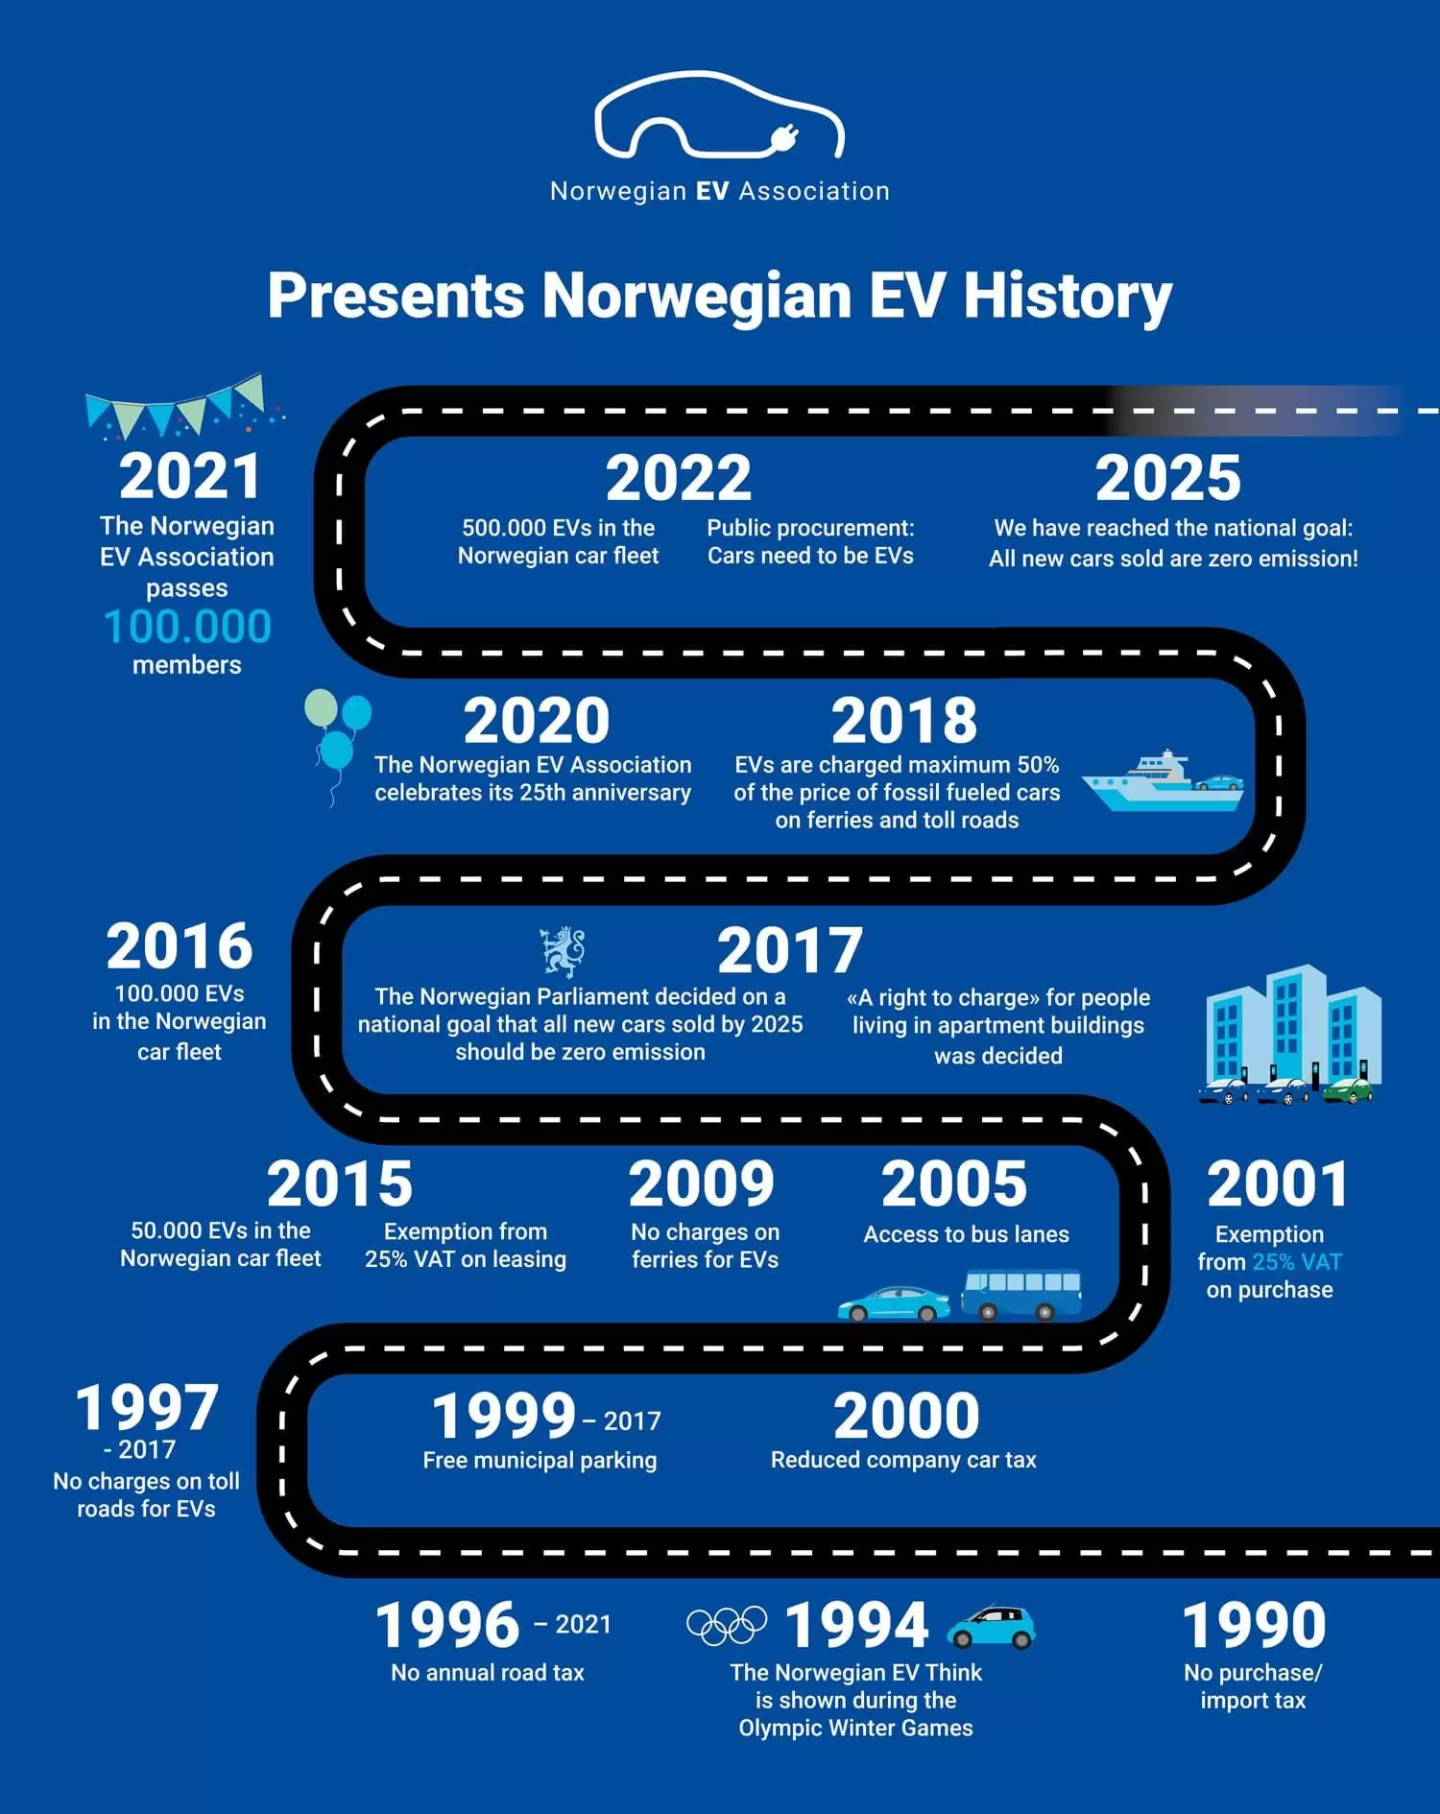 An infographic exploring Norway's electric vehicle history as driving down a road: Starting in 1990 with no purchase/import tax  proceeding through updates from the 2000s and ending with 500,000 EVs in 2022 and the national goal of all new cars sold are zero emissions by 2025